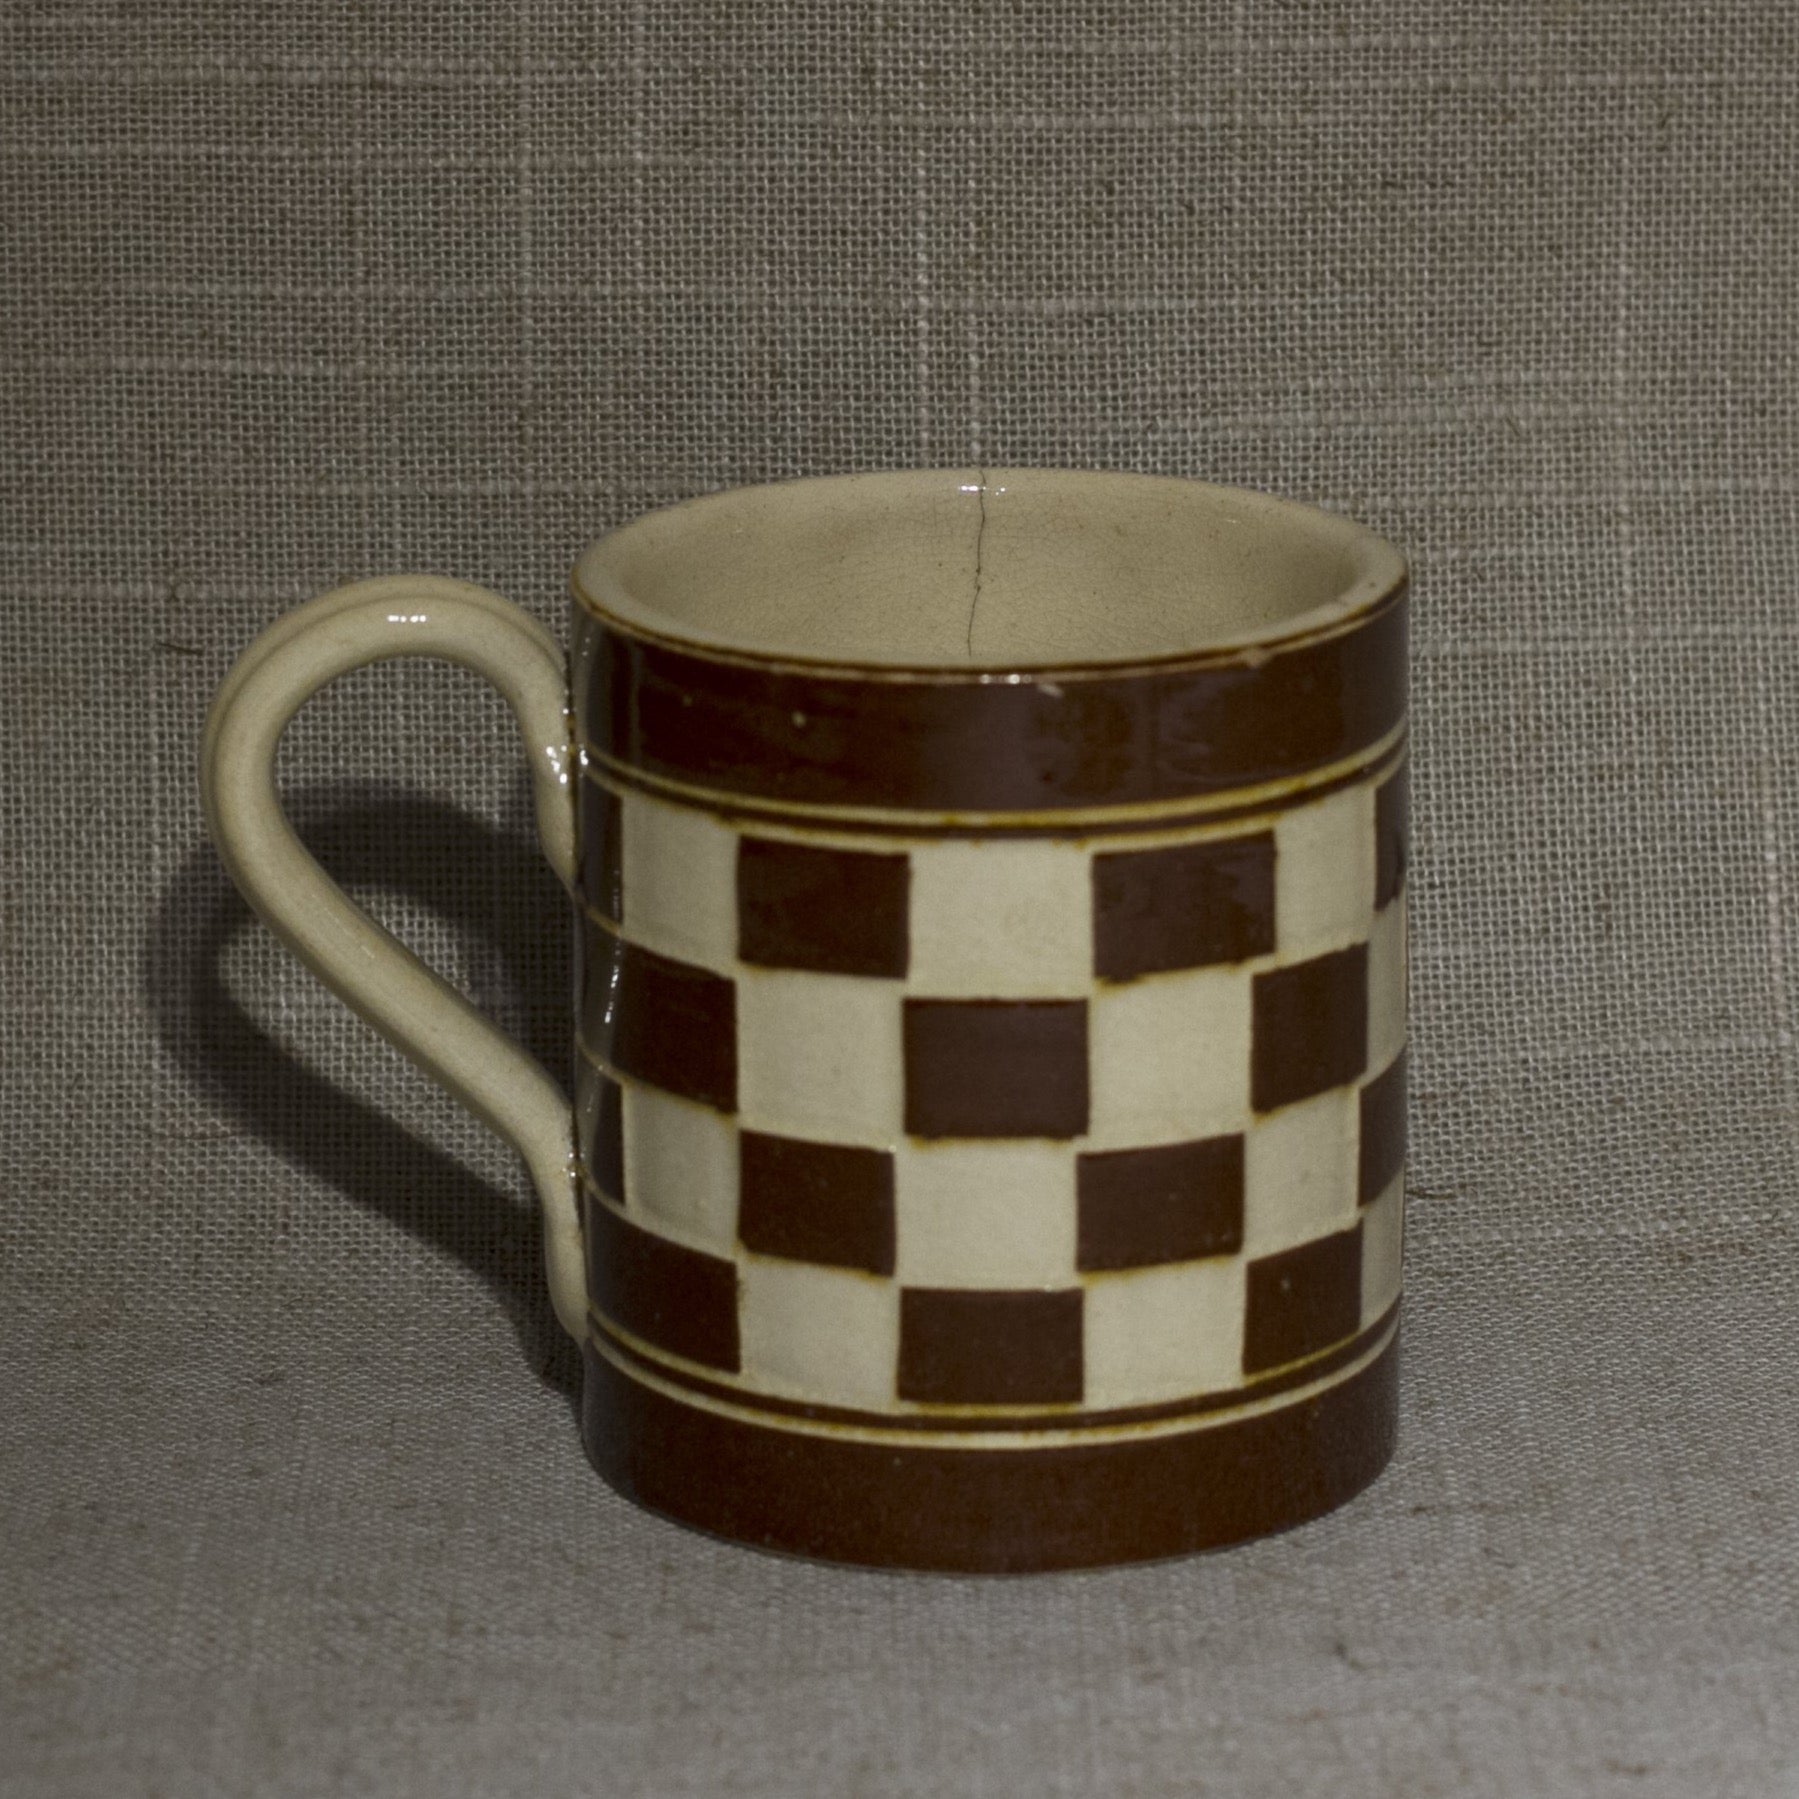 Antique MOCHA WARE Mug Checkerboard Pattern in Ivory and Chocolate Brown Marked AUSTRIA 00 Circa Early 19th Century